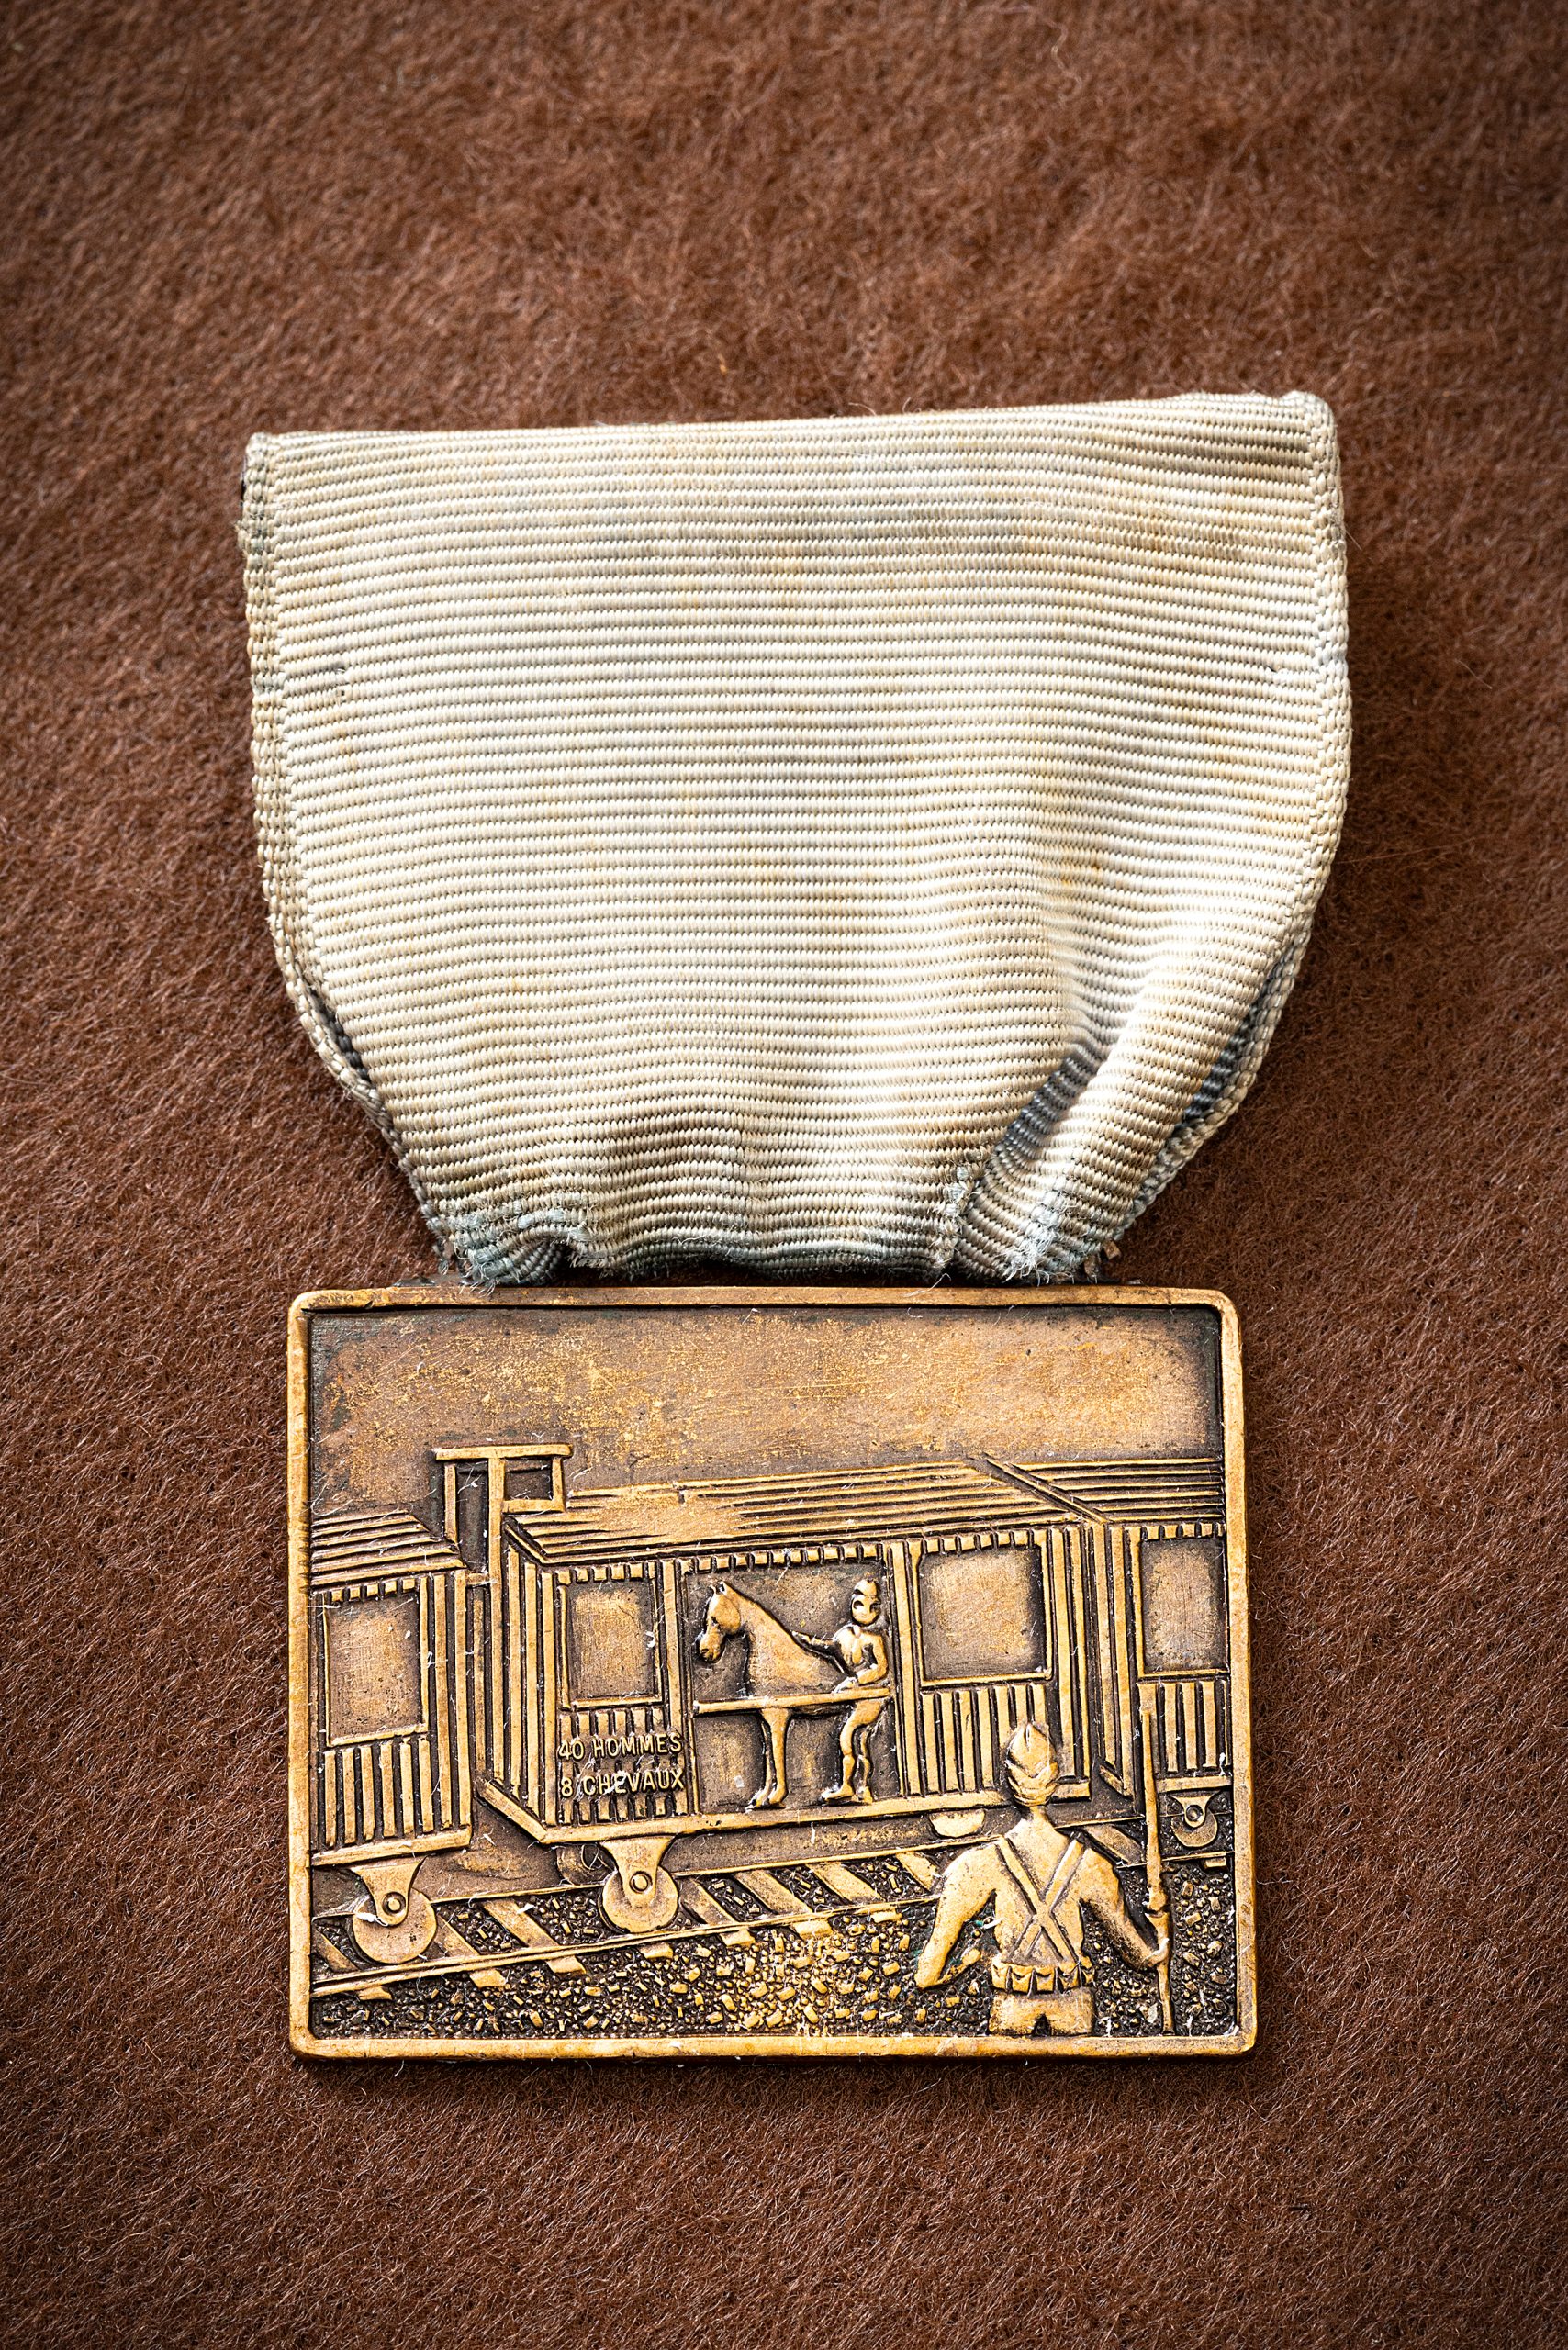 The “Forty and Eight” Club name comes from the railroad cars used in France during World War I 
to transport American soldiers to the western front; they could hold 40 men or eight horses. Every member was proud to own this medal.